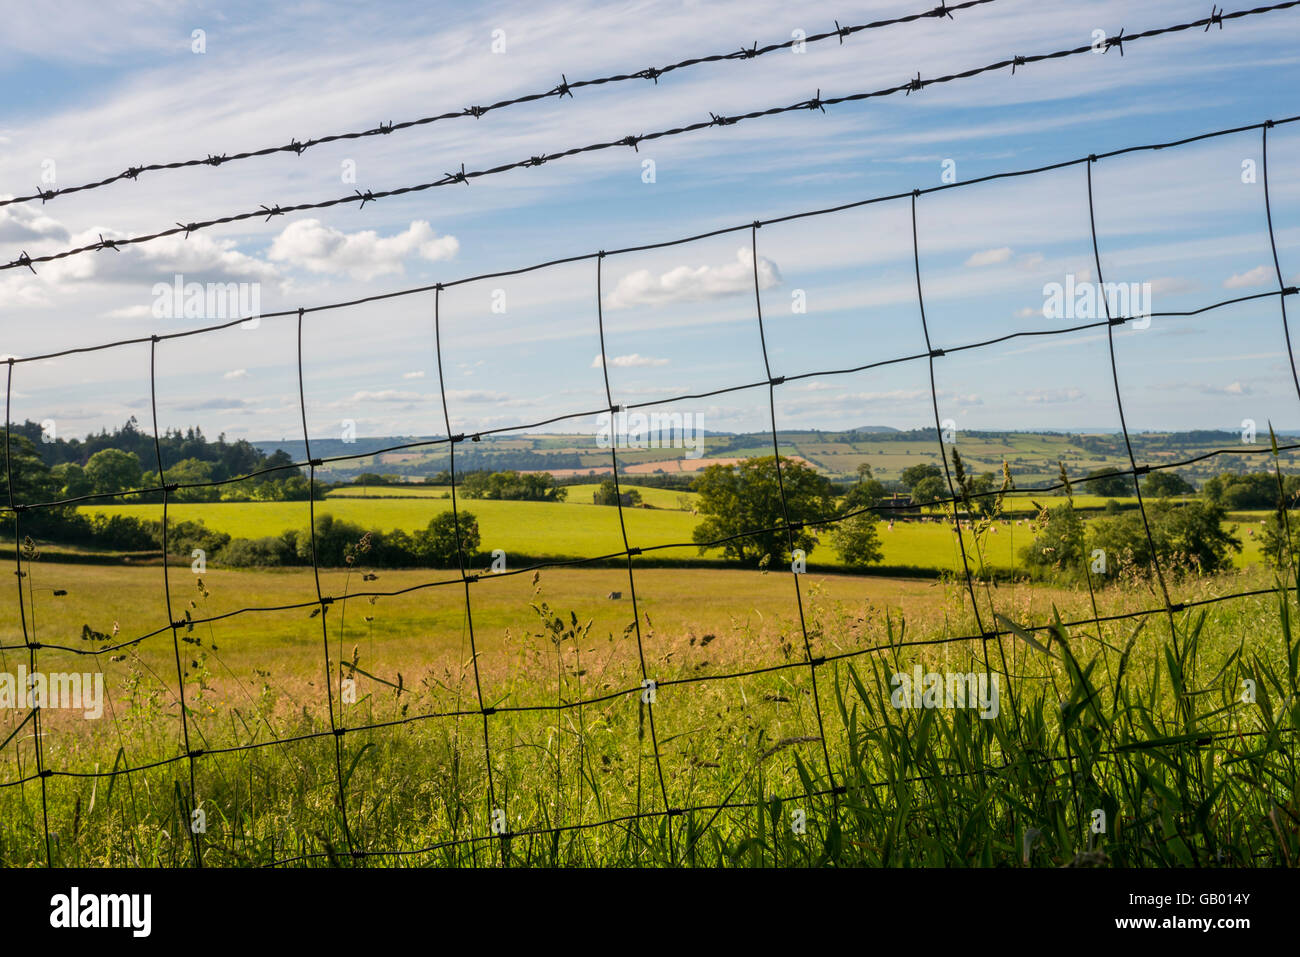 Livestock fencing on a farm in the Shropshire countryside, England, UK. Stock Photo